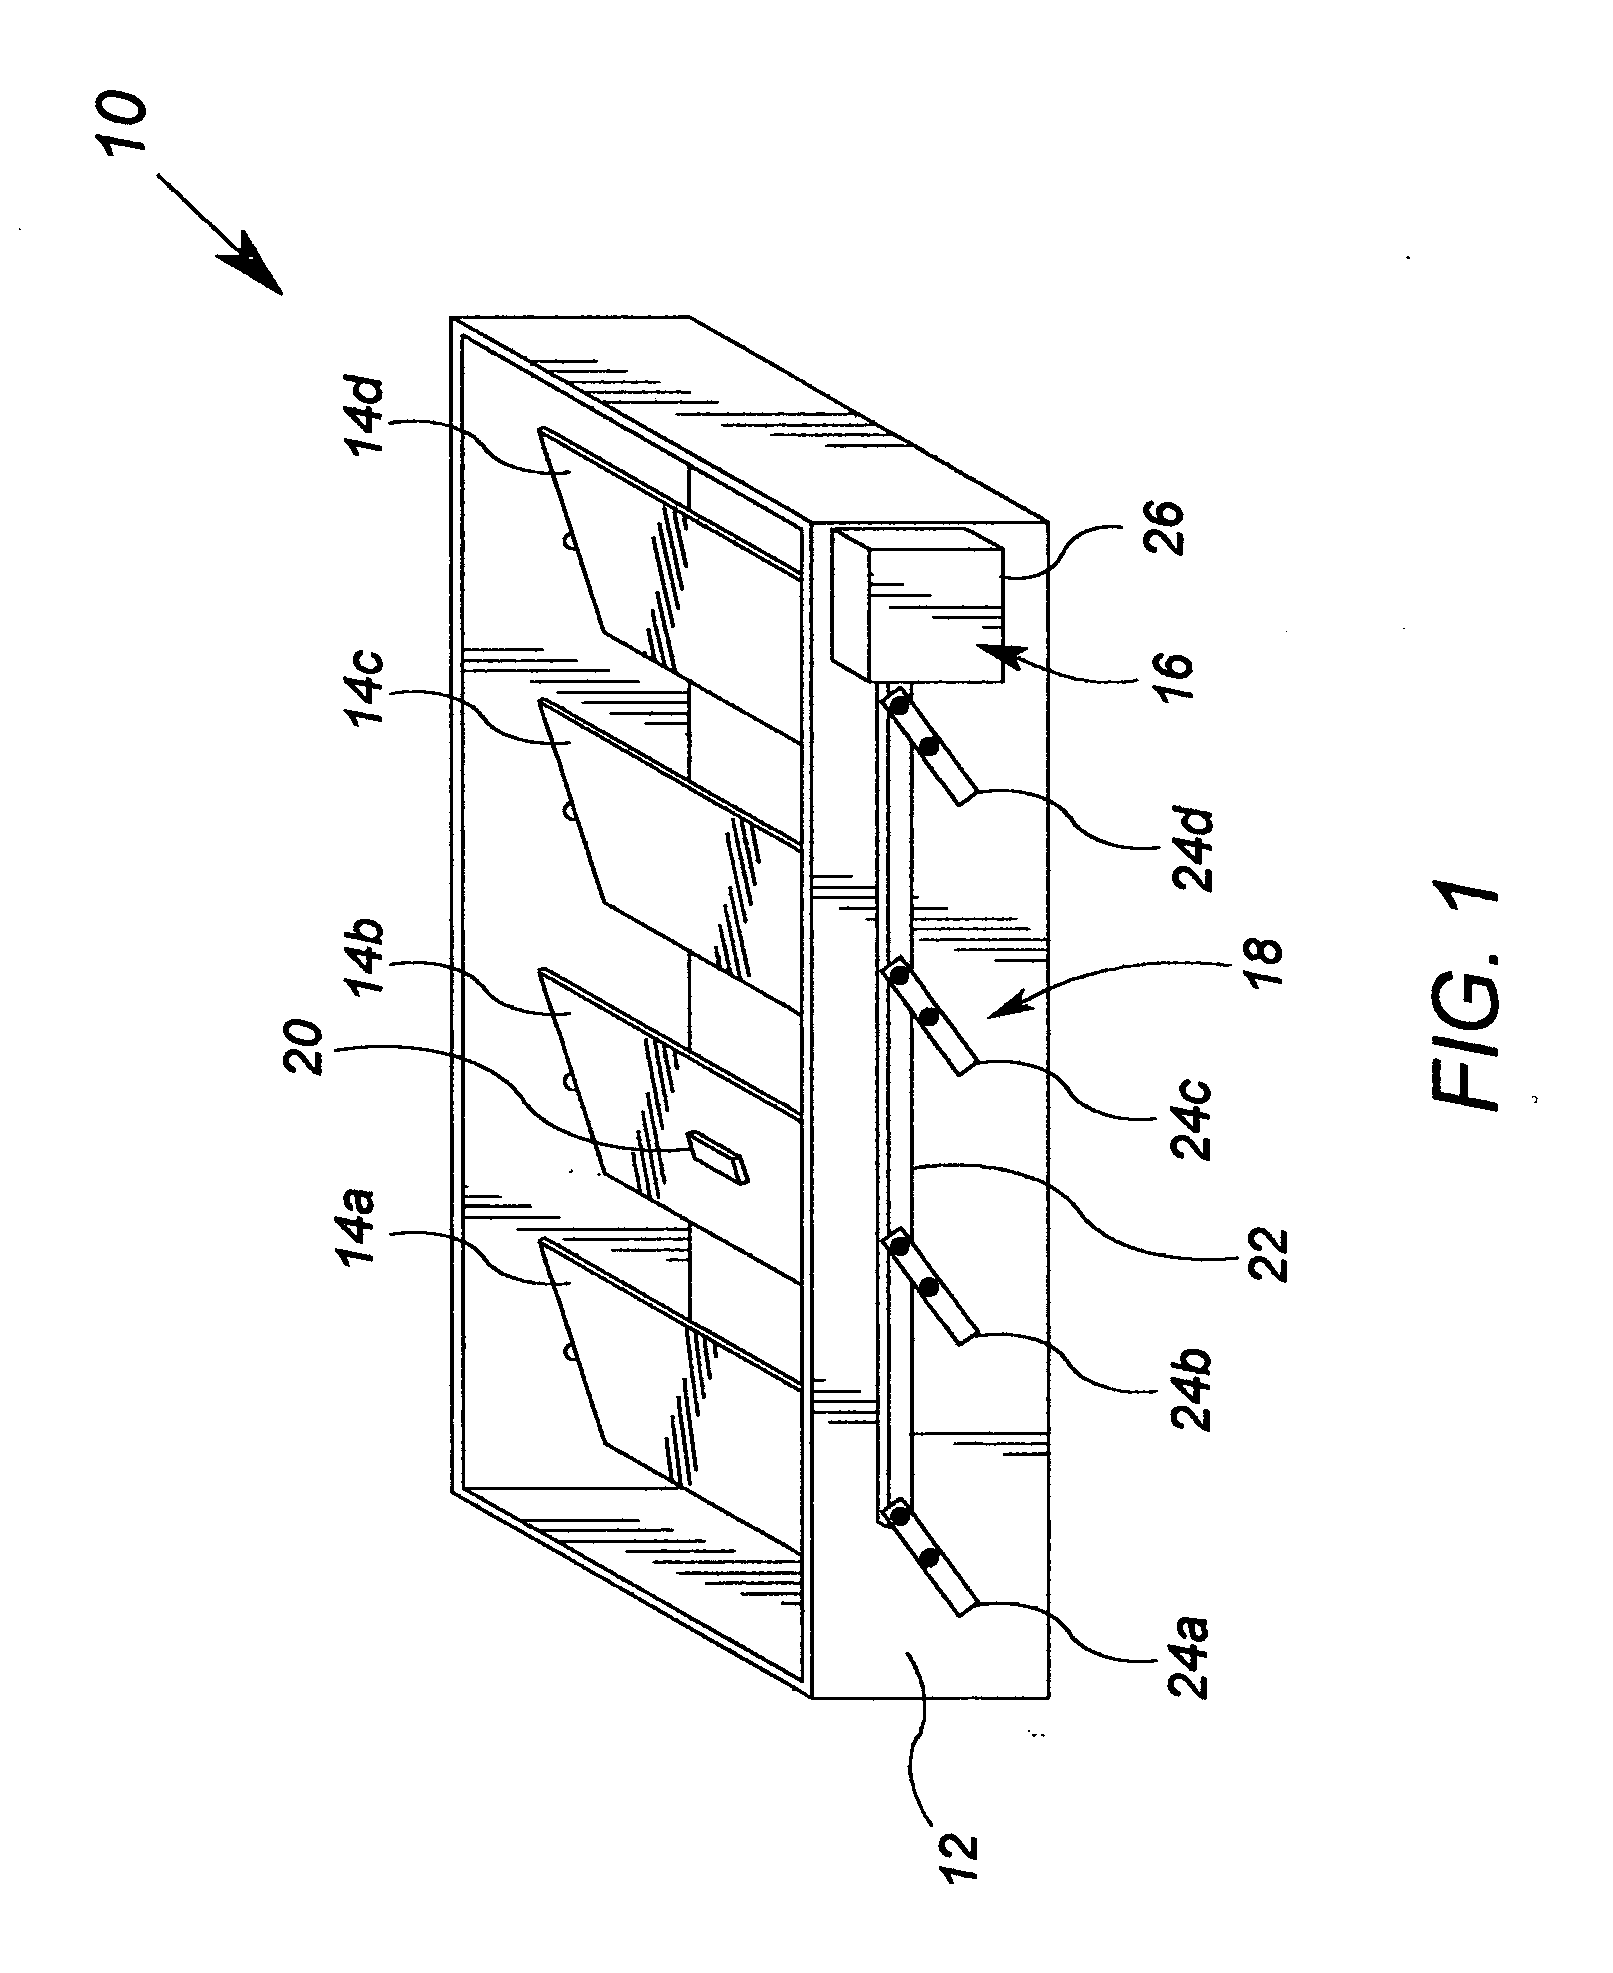 Arrangement for detecting the position of a damper blade using a wireless communication sensor